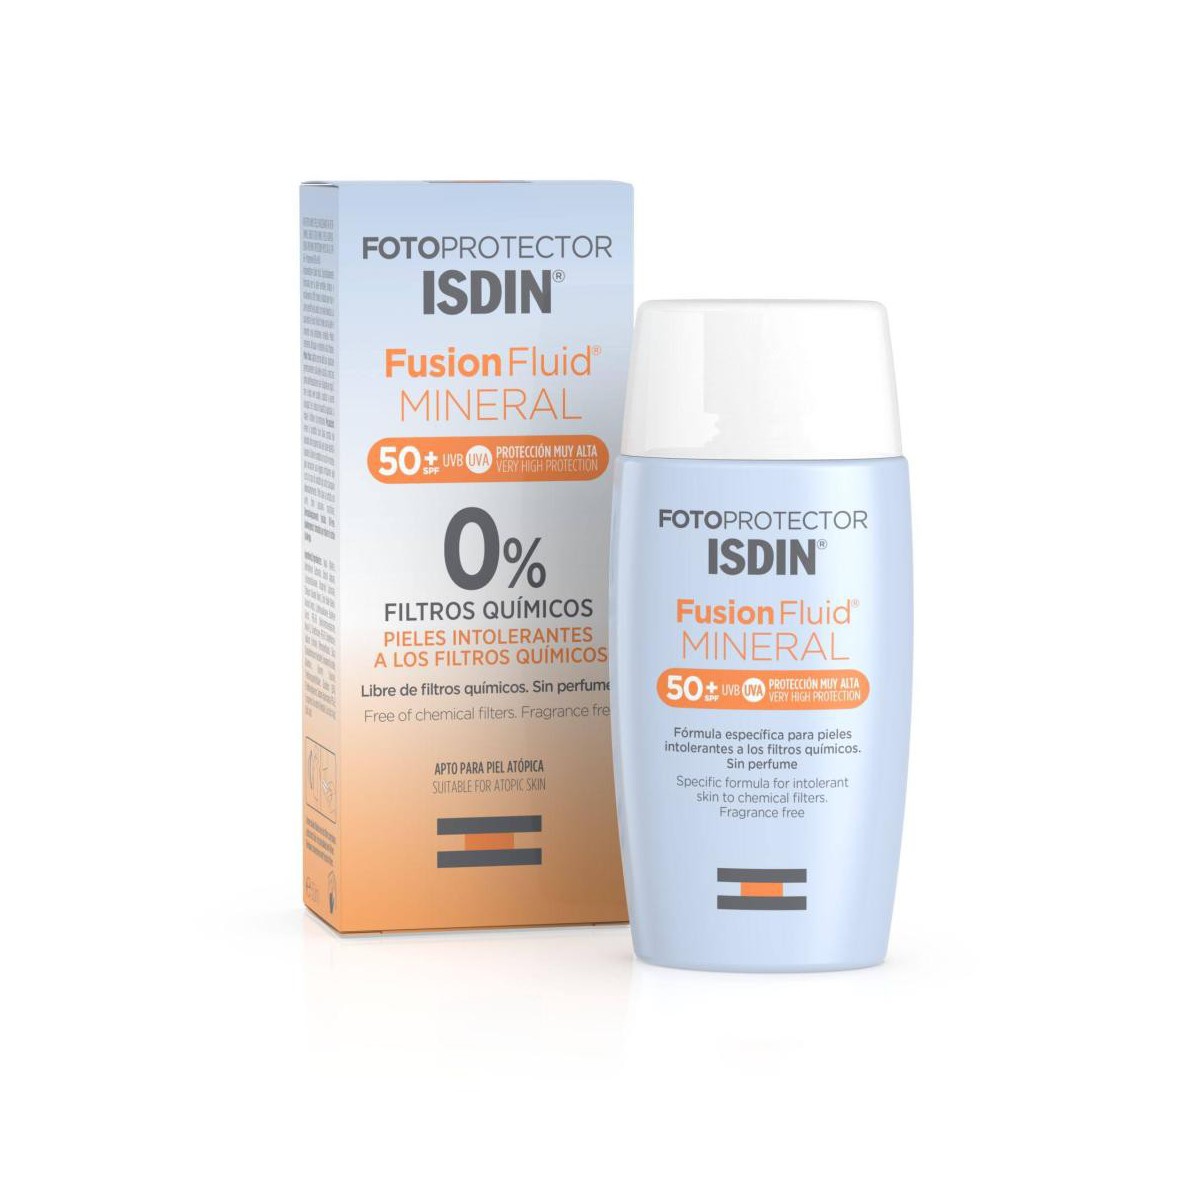 Fotoprotector ISDIN Mineral Fusion Fluid SPF 50+